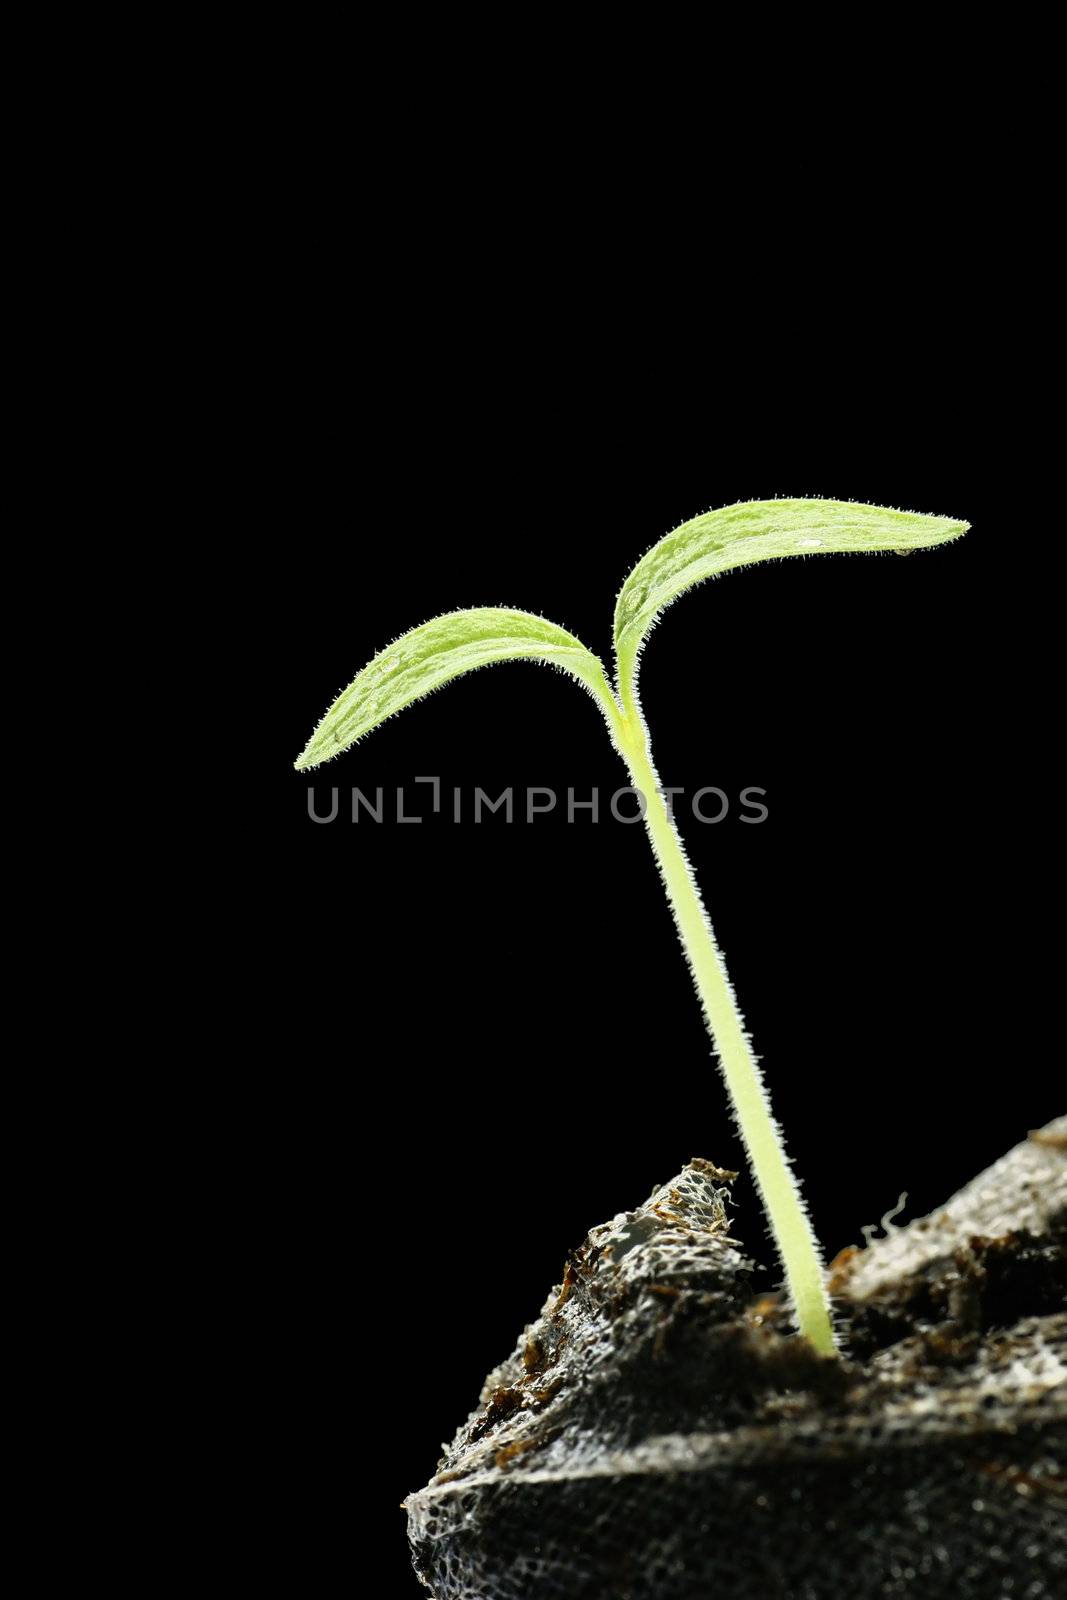 New life: baby green tomato sprout with water droplets coming out of peat in mesh, isolated on black background.